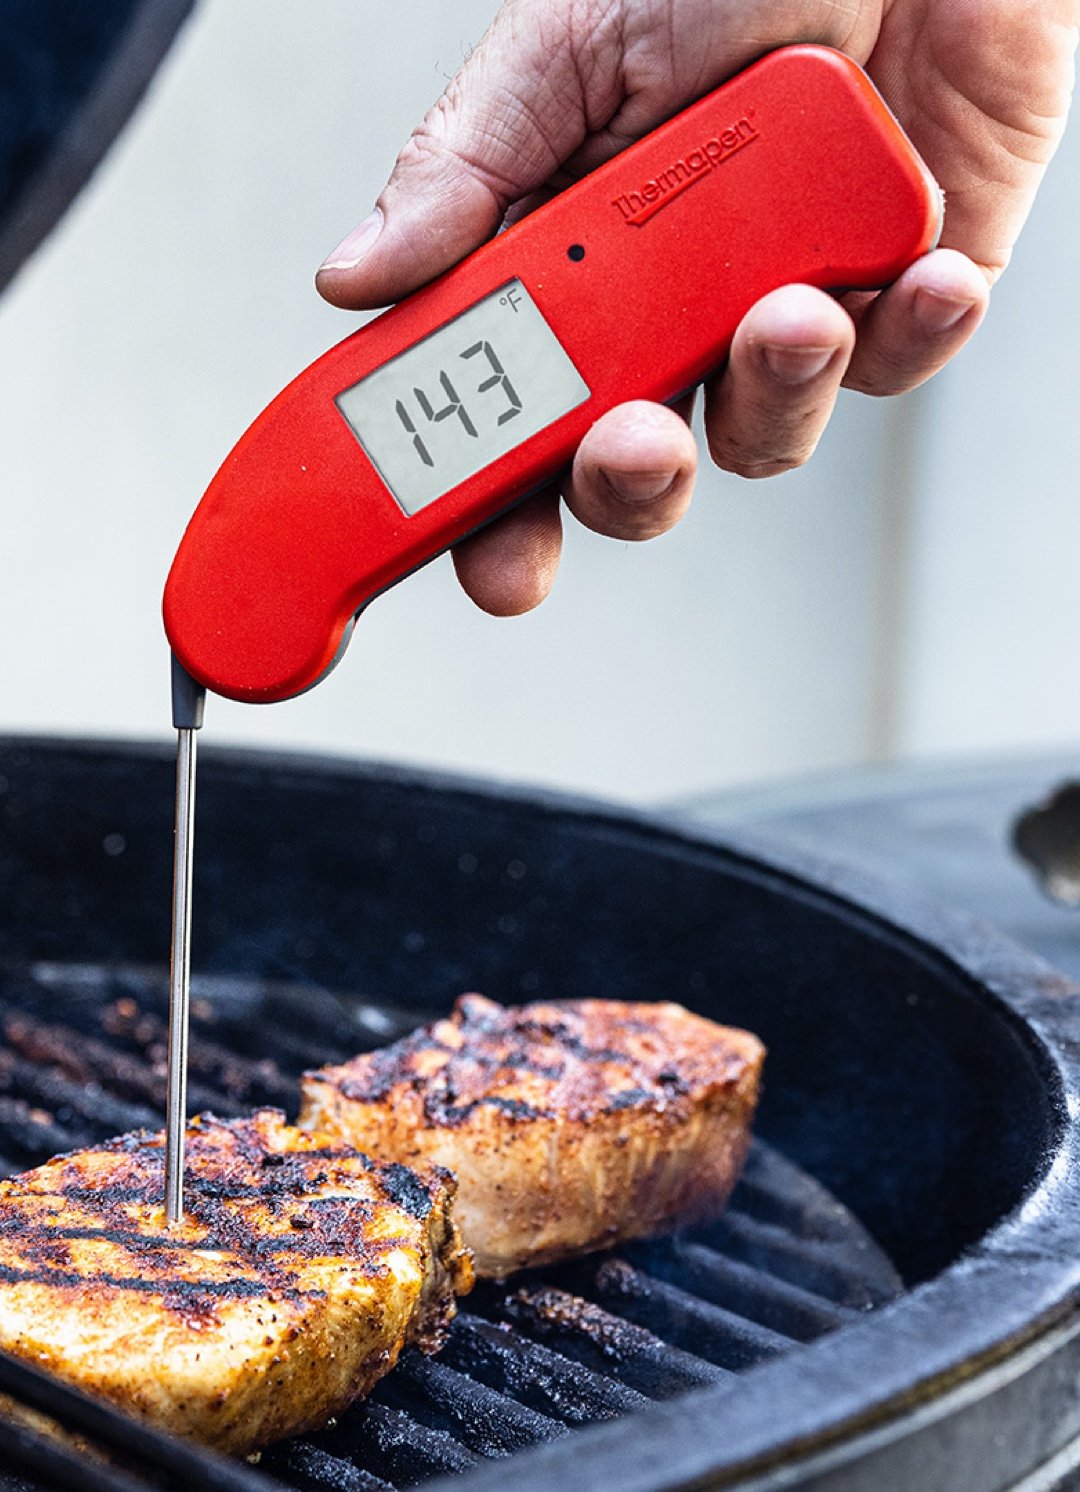 30% Off ChefAlarm + Still Time for Delivery by Christmas w/ 2-Day Shipping  - ThermoWorks